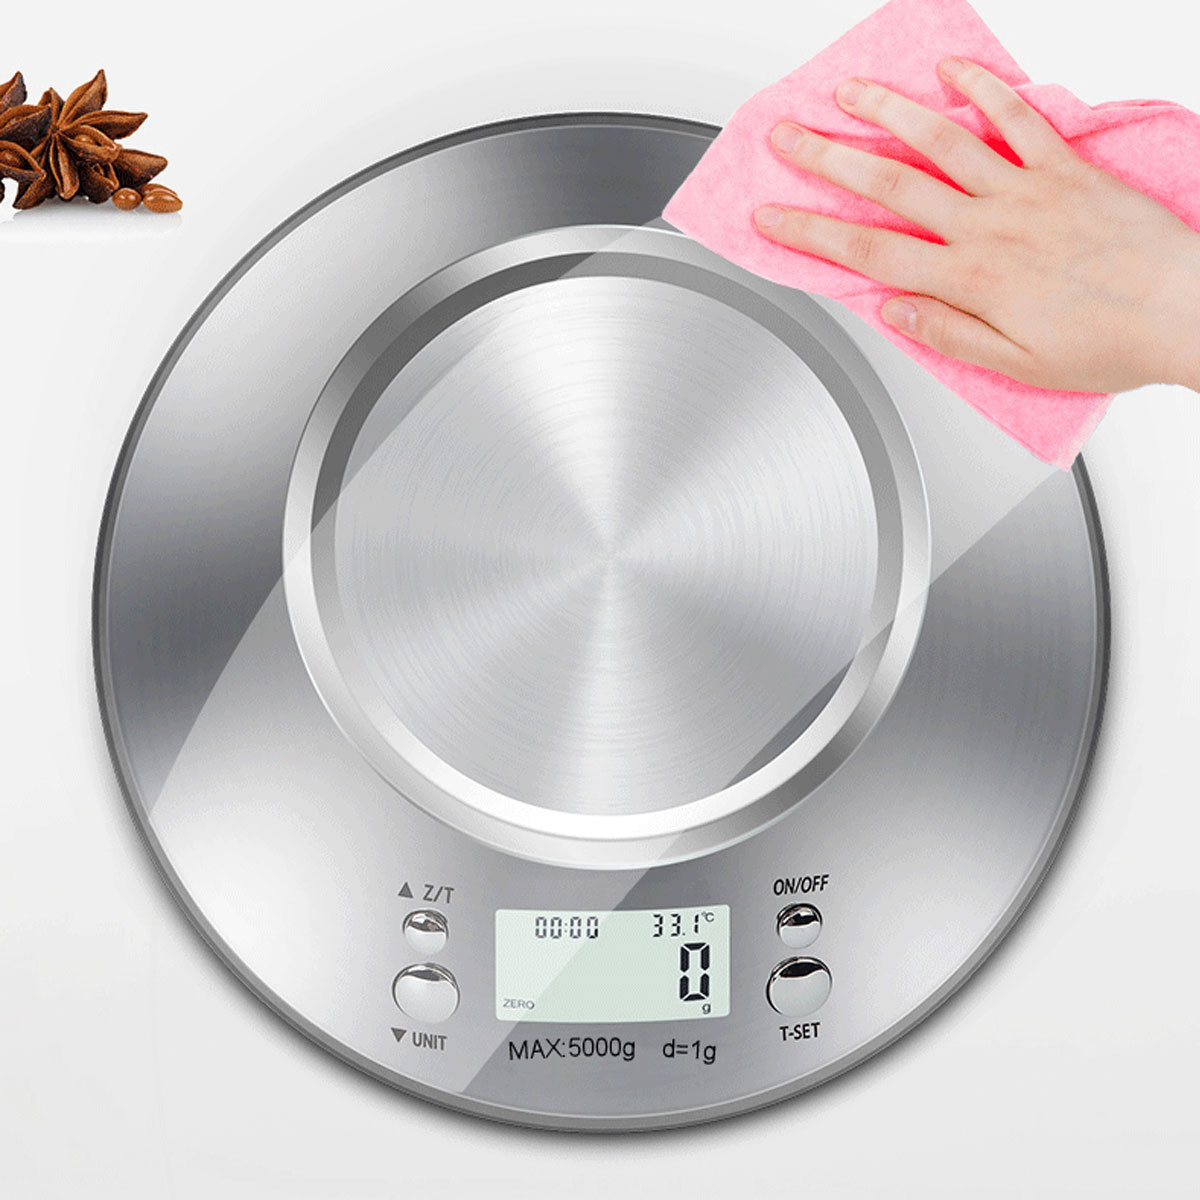 Digital-Kitchen-Scale-LCD-Display-Stainless-Steel-Baking-High-Precision-Removable-Kitchen-Scale-1859940-12